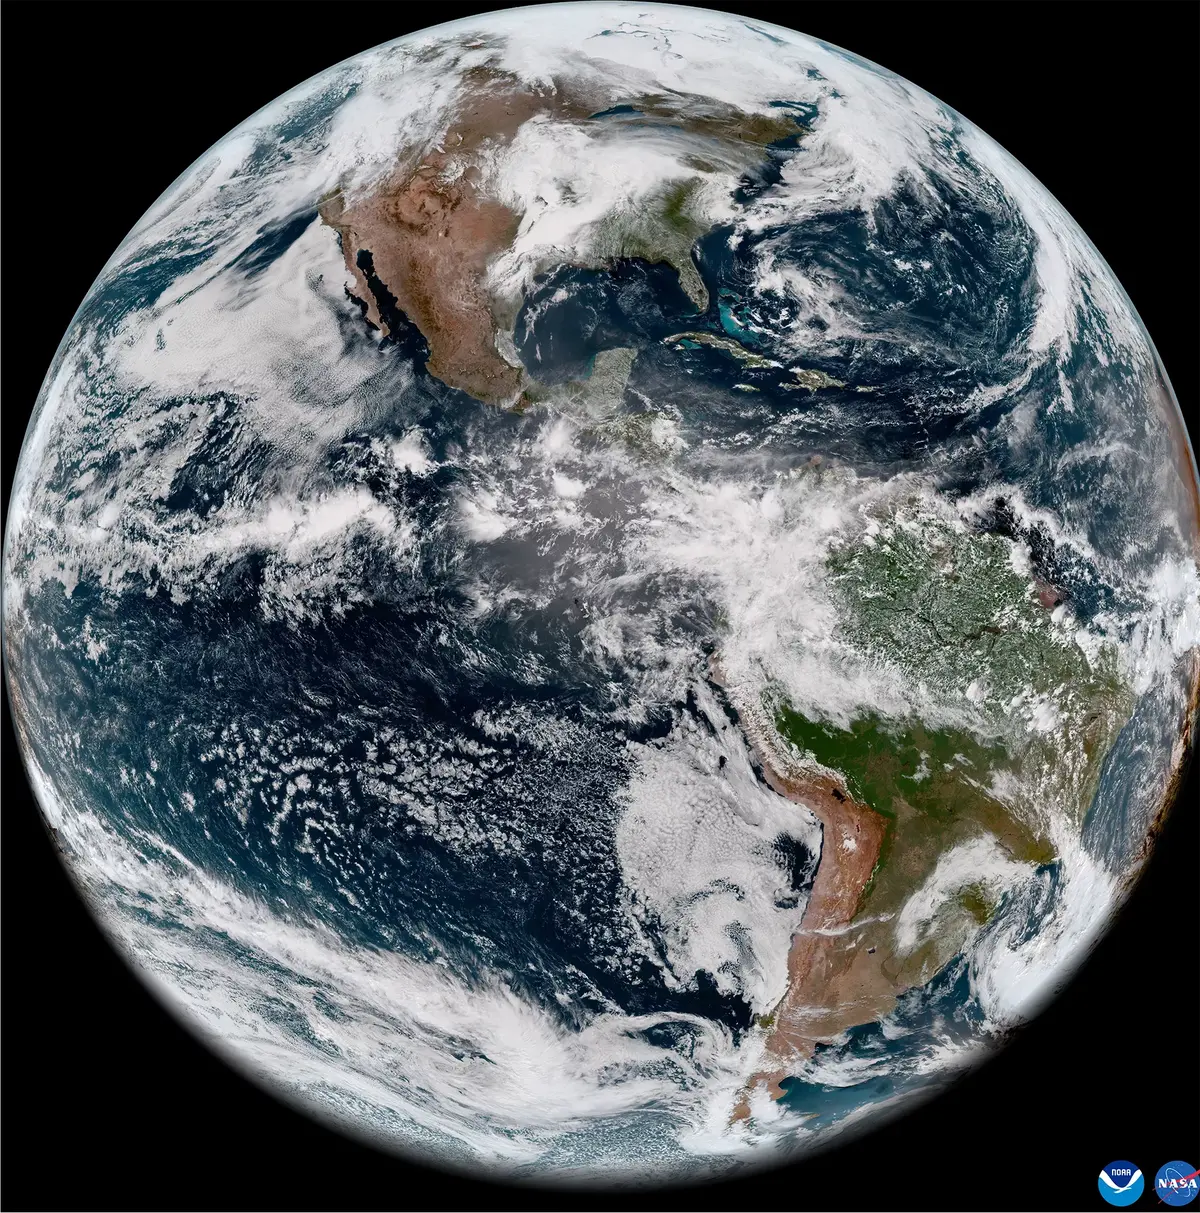 Newest US weather satellite releases first images